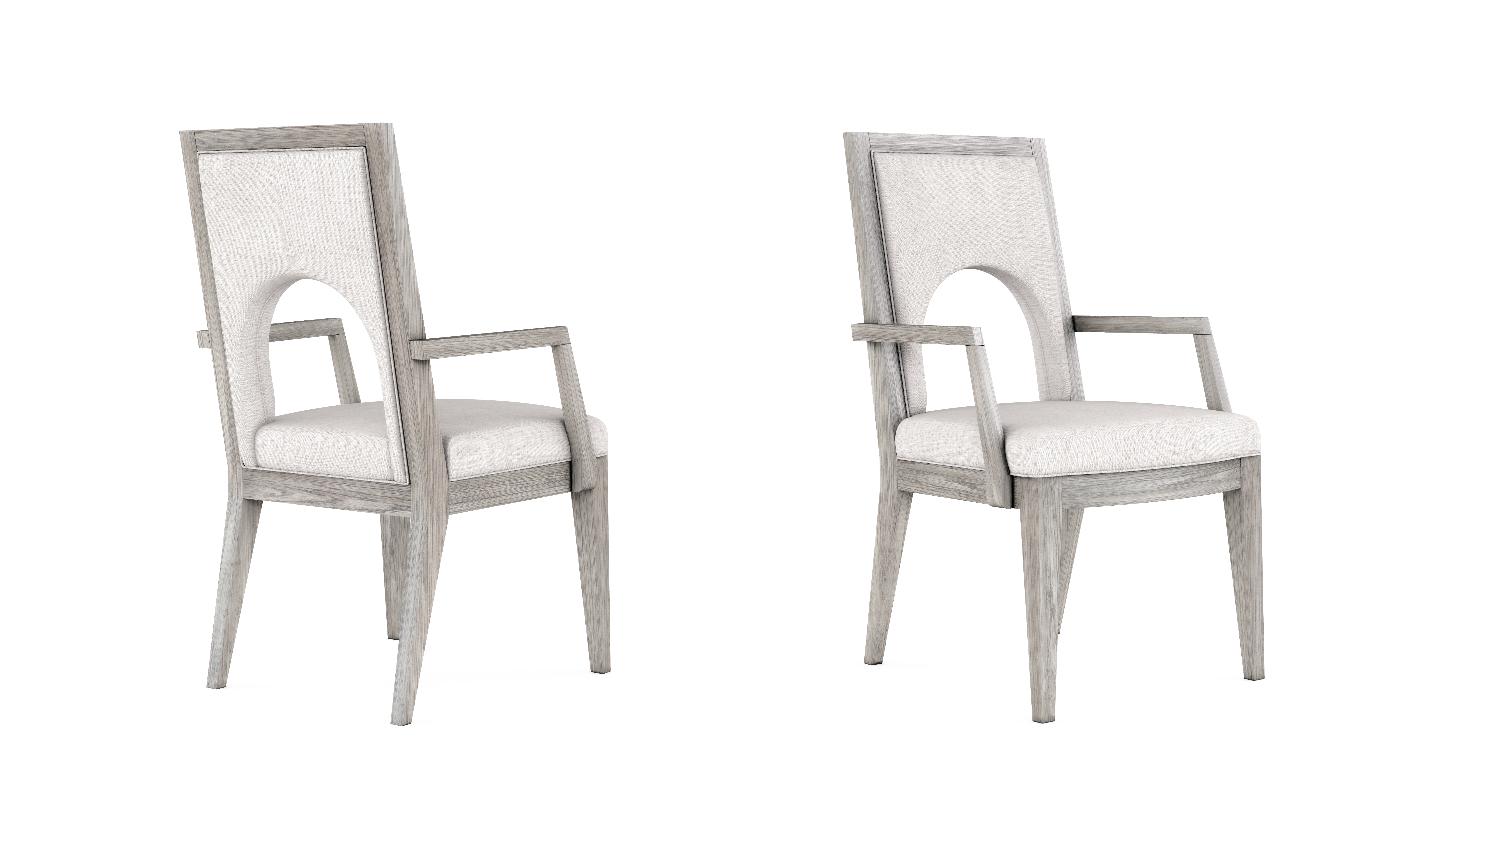 Modern, Casual Arm Chair Set Vault 285207-2354 in Gray Fabric